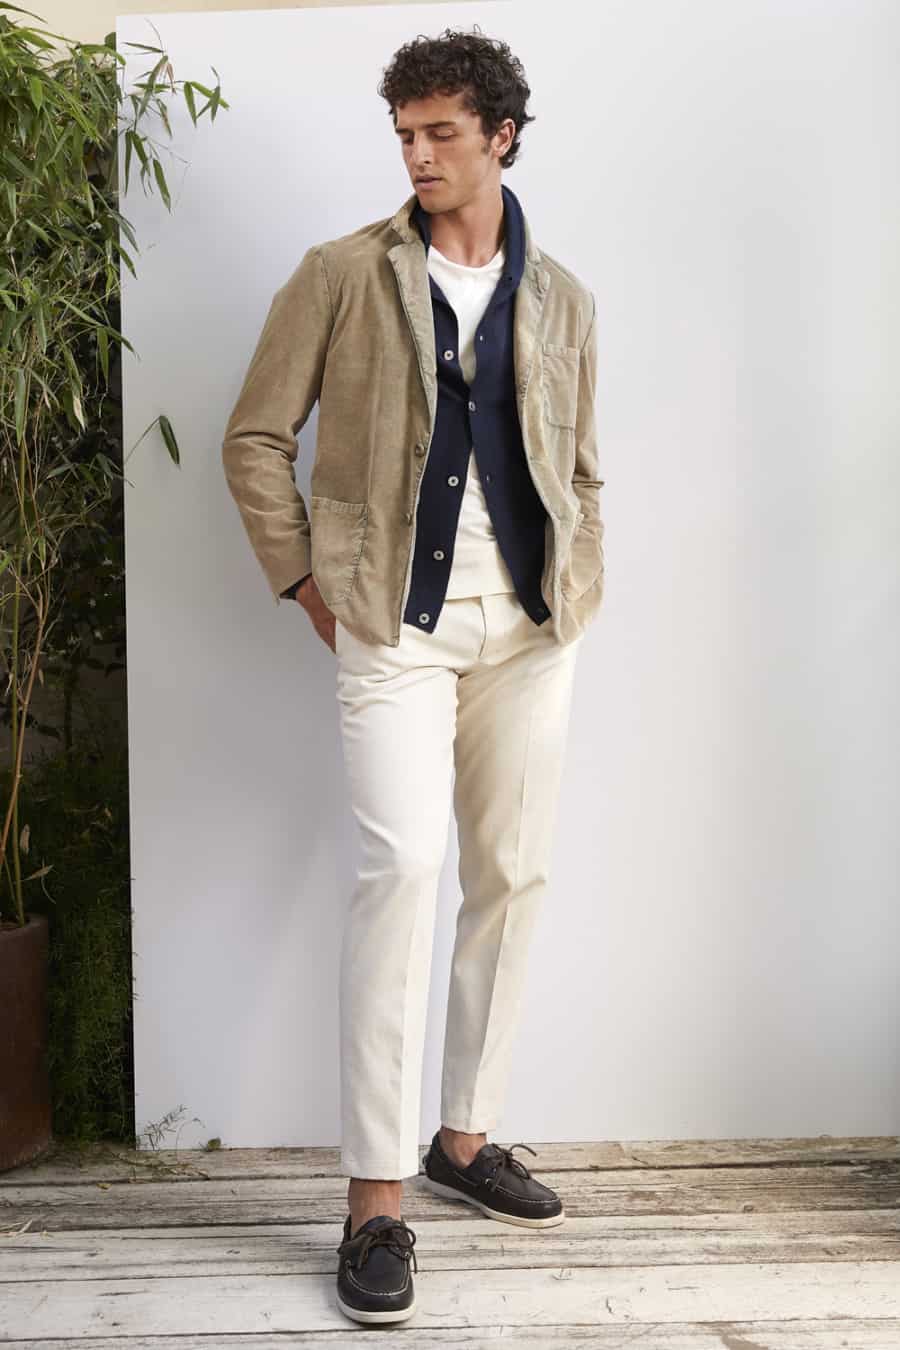 Men's off-white trousers, white tee, navy cardigan, twill unstructured blazer and deck shoes outfit